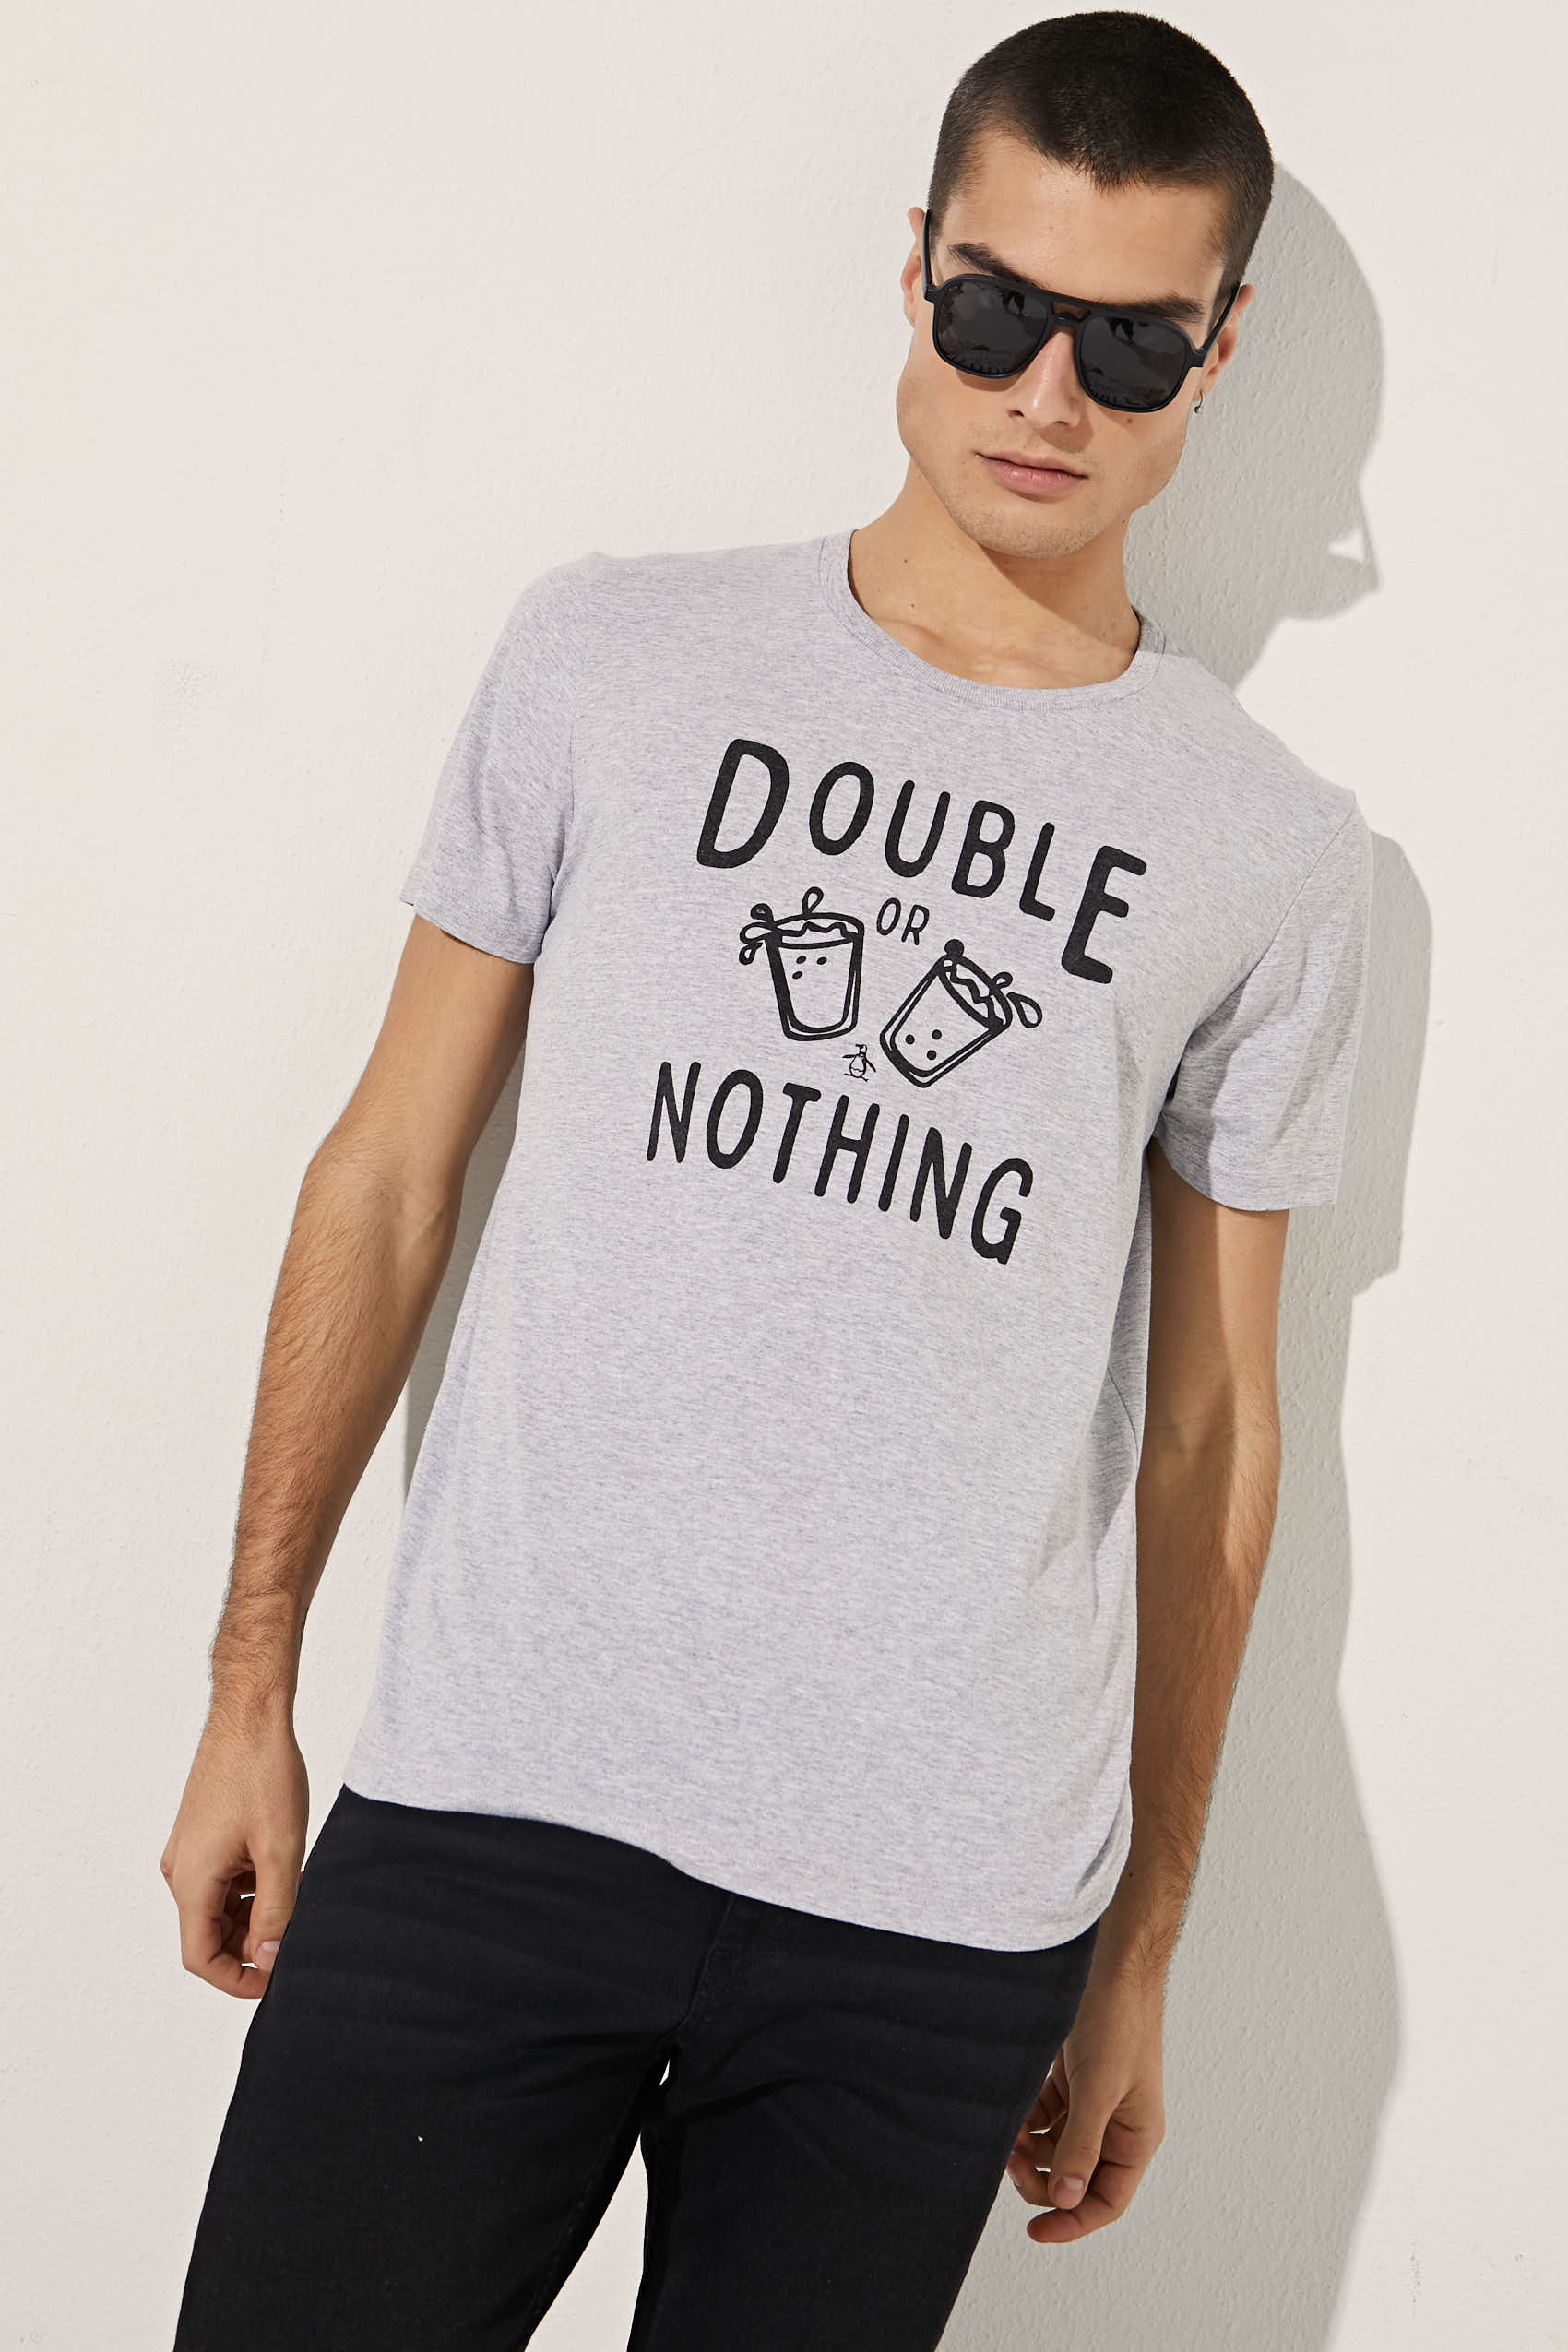 penguin_double-or-nothing-tee_50-13-2022__picture-30370